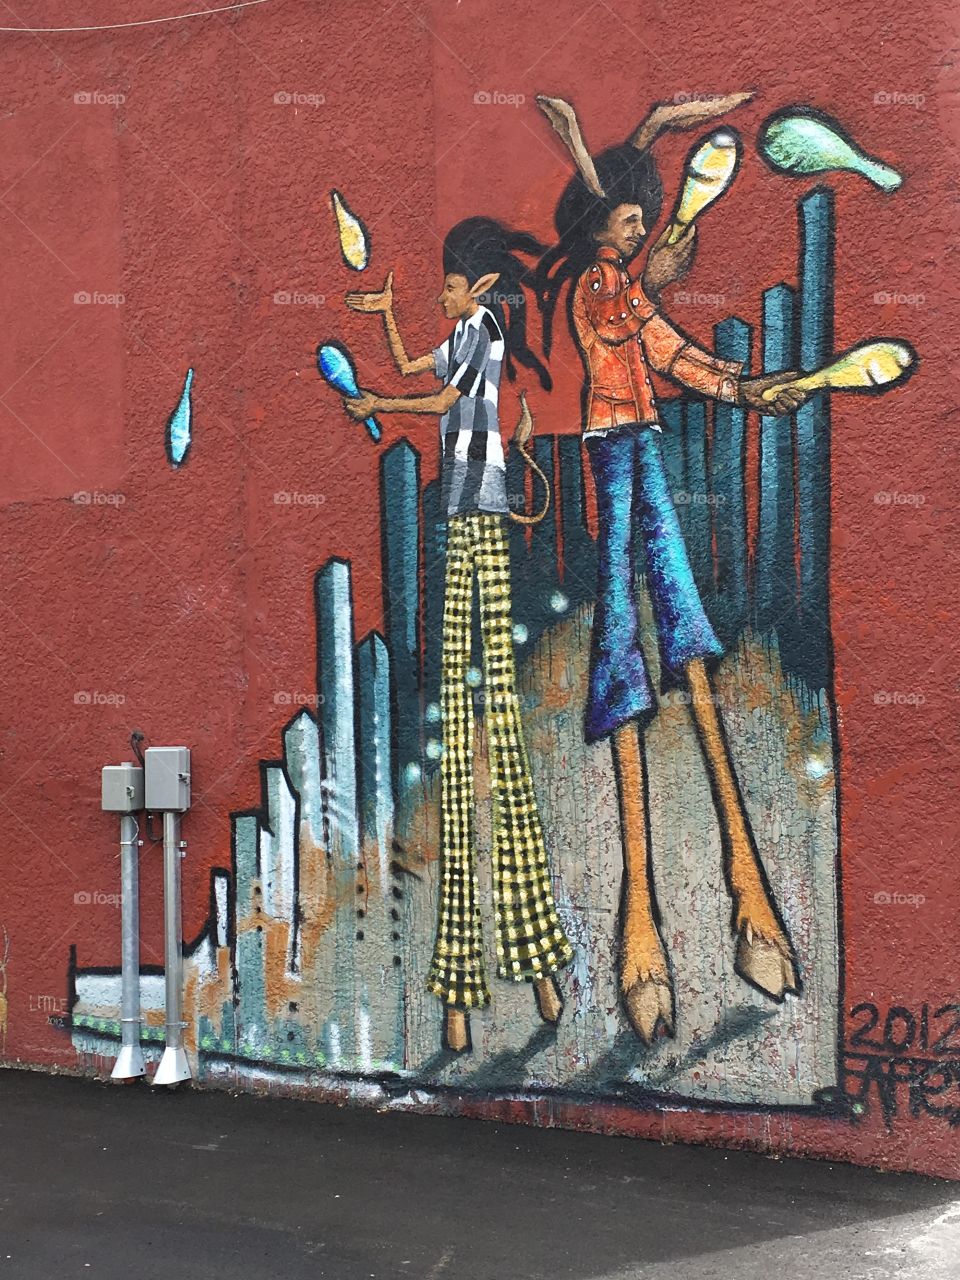 Amazing artwork found on a building 